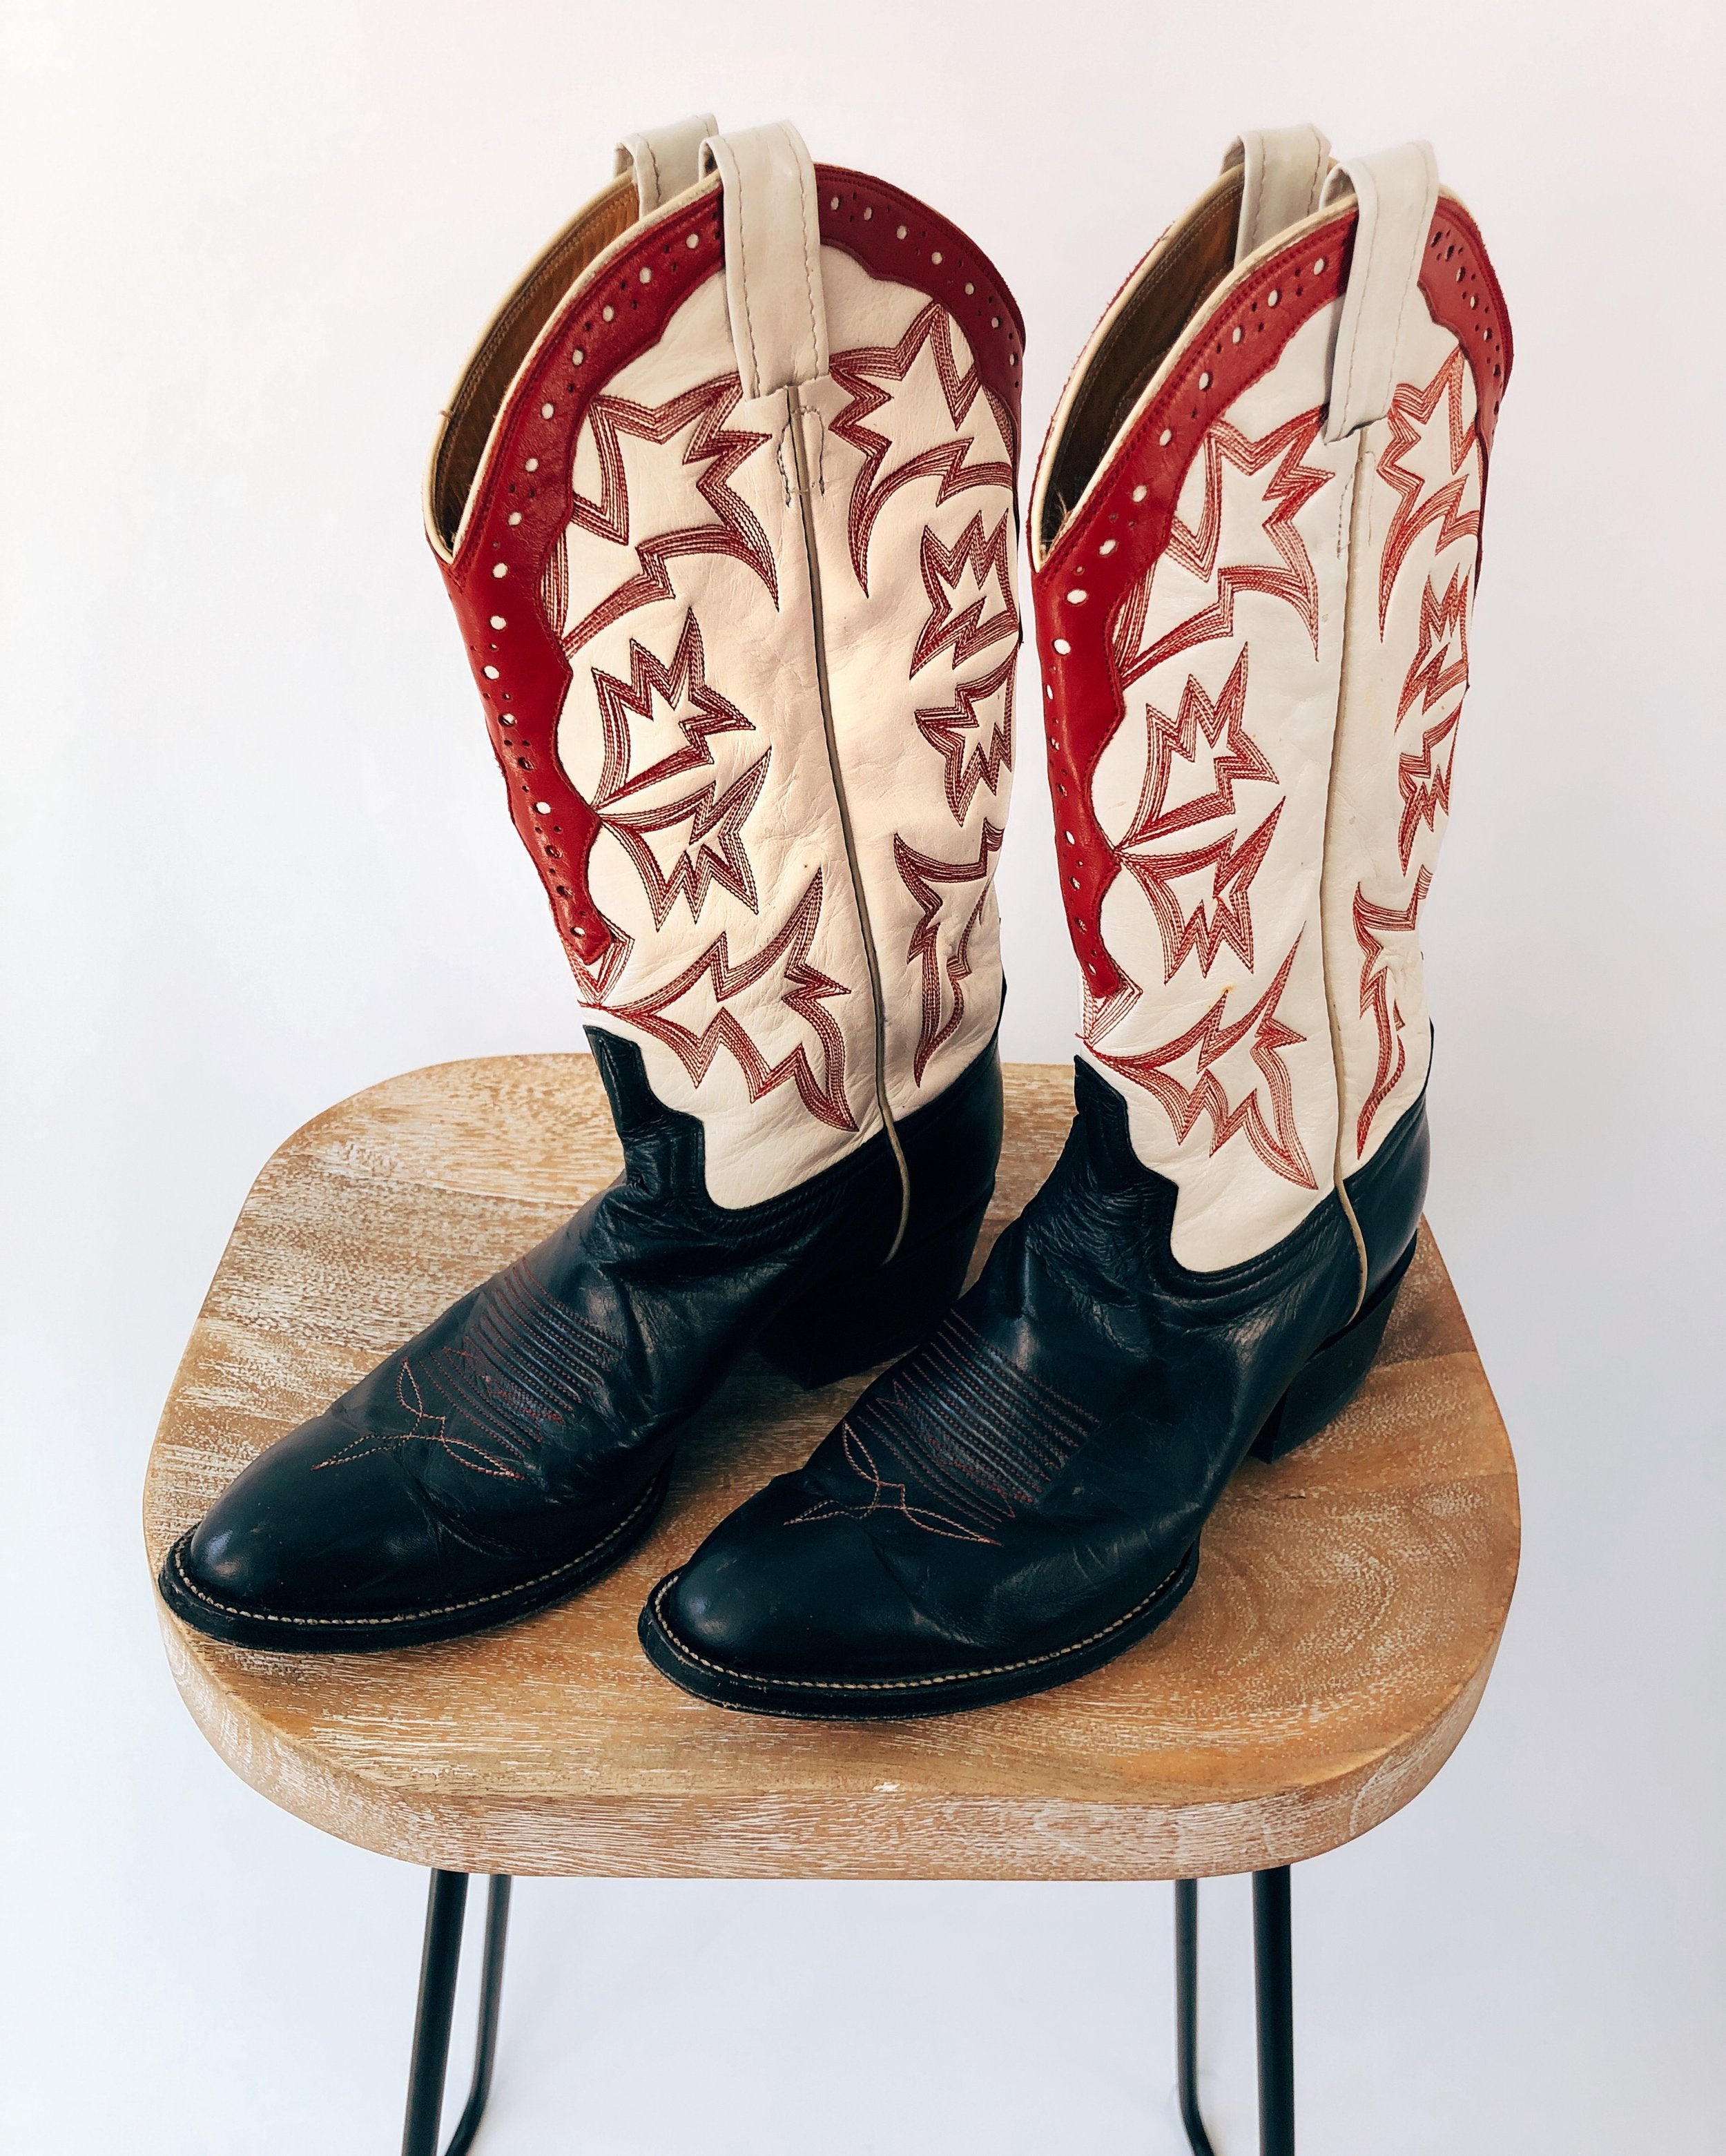 Vintage Red, White & Blue Cowboy Boots (9/10)